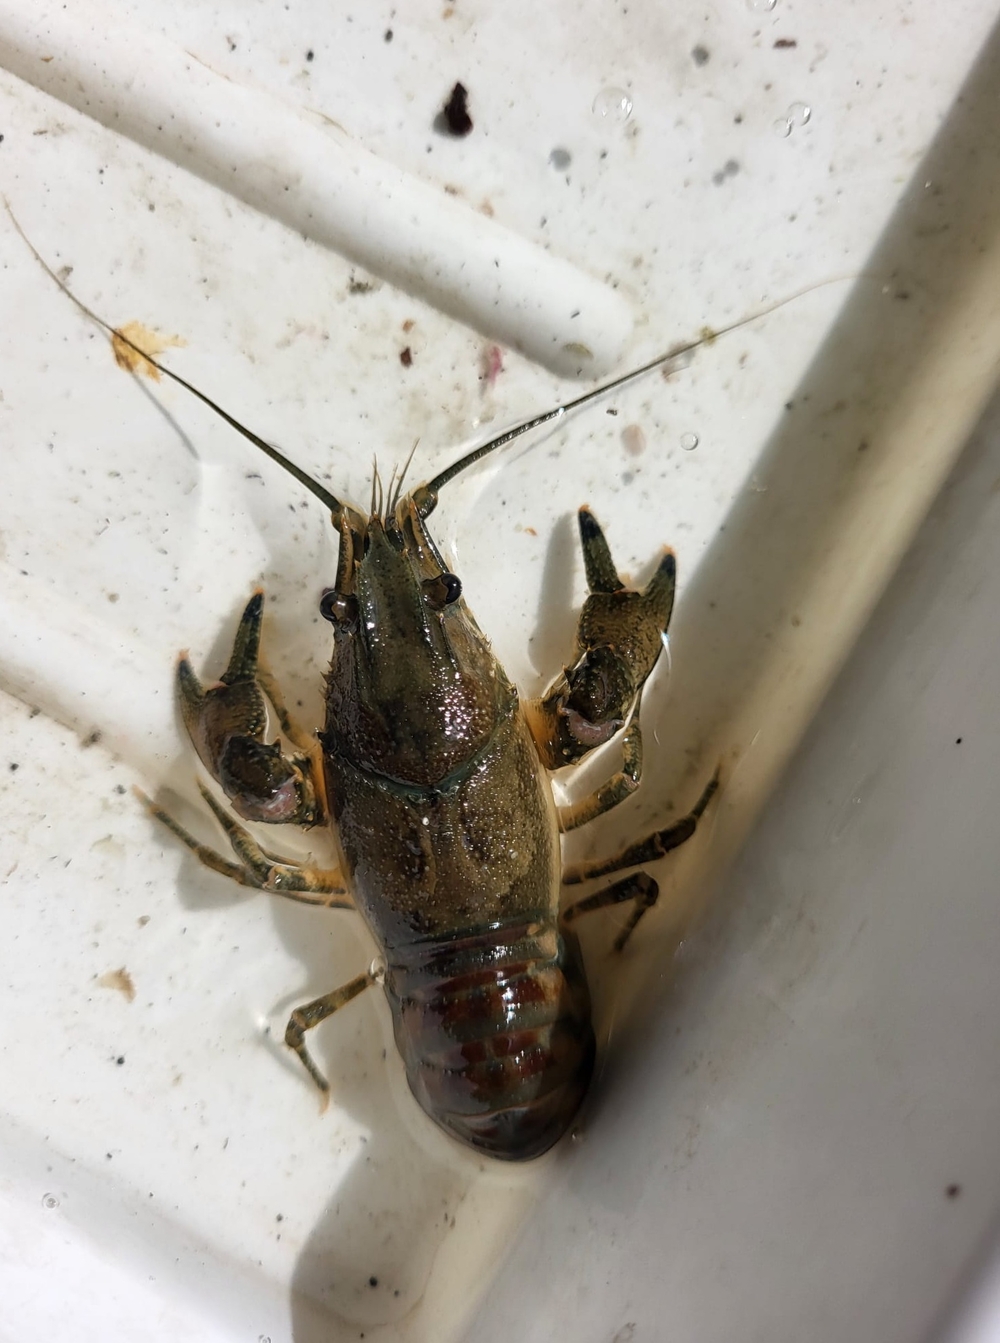 One of the crustaceans – a crayfish – caught during research conducted by the student